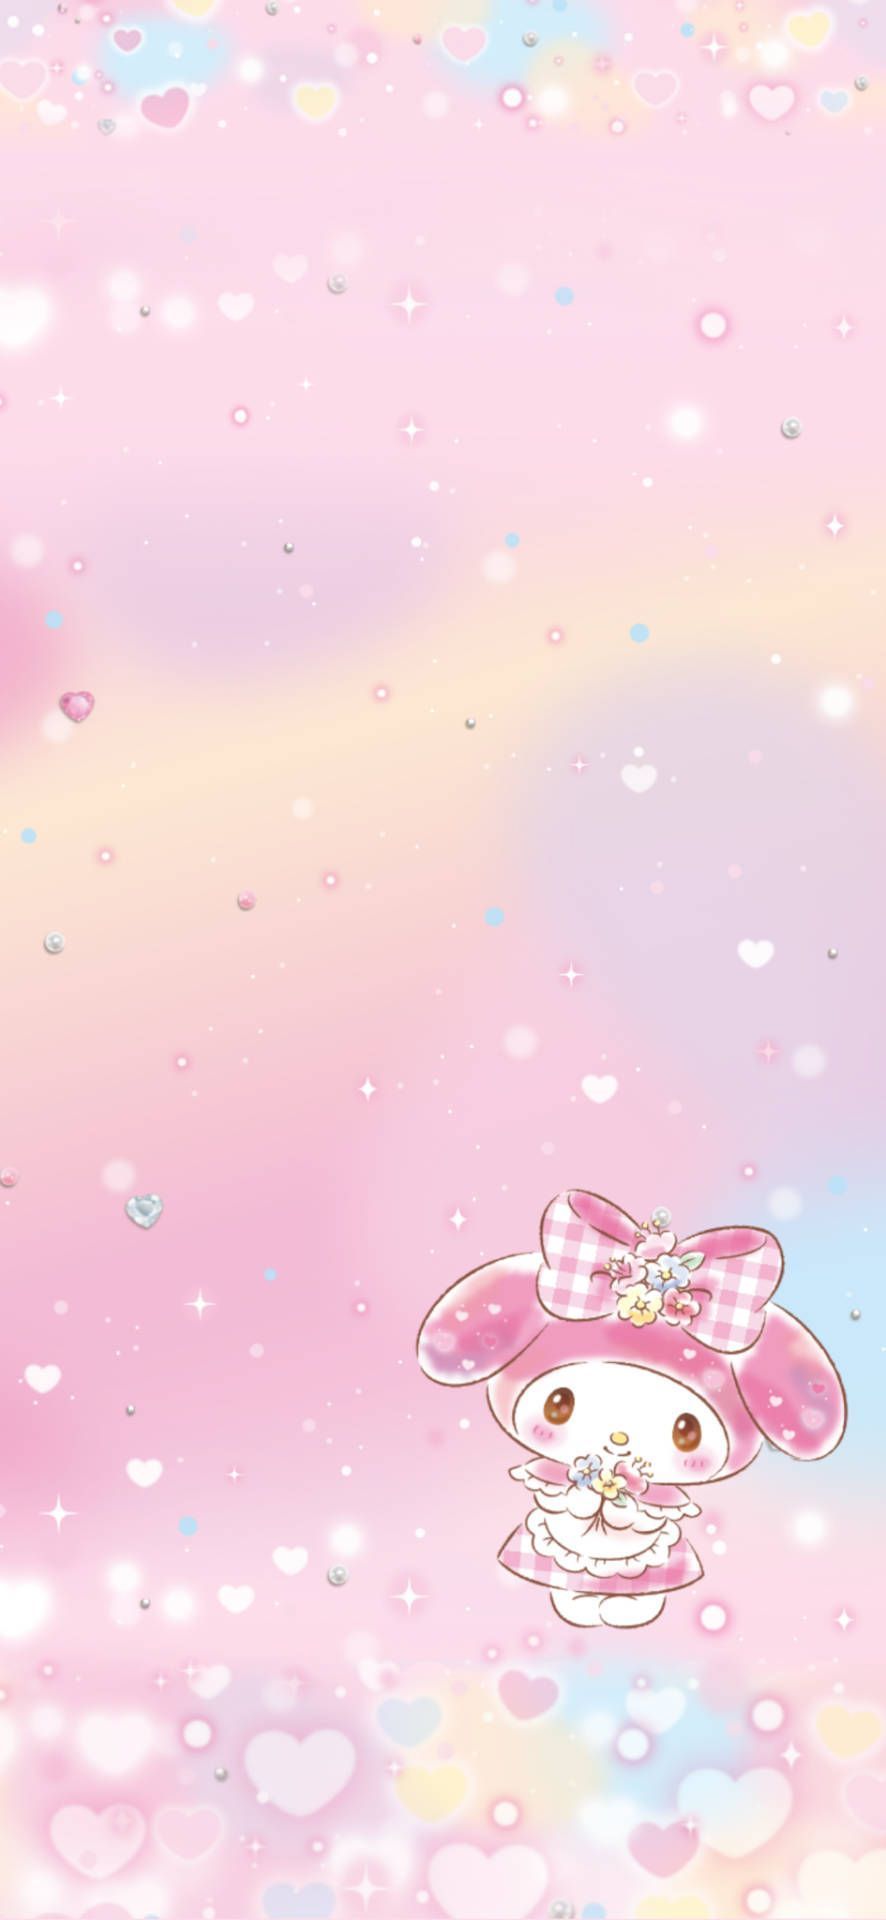 My Melody wallpaper for phone and desktop backgrounds. - My Melody